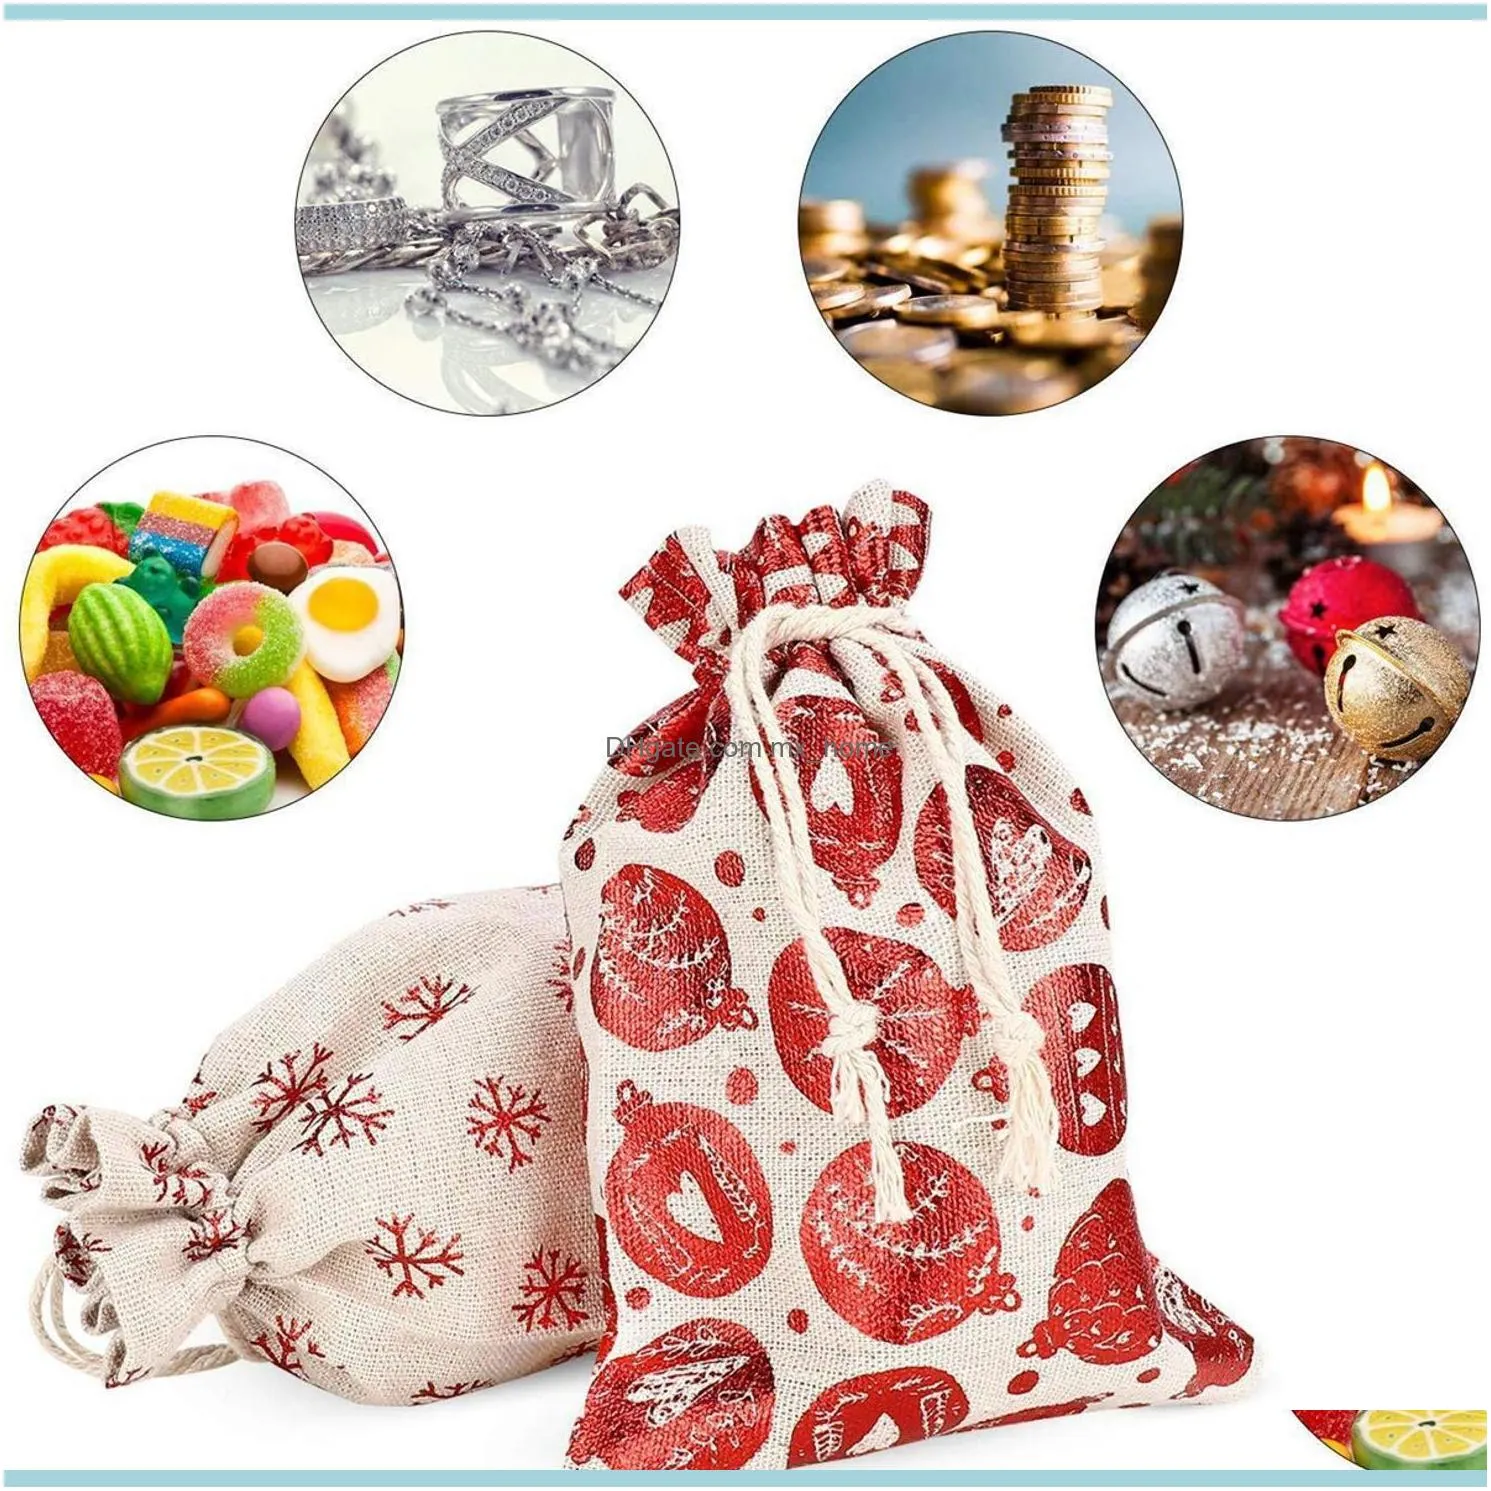 Christmas Candy Bag Advent Calendar Merry Christmas Decorations for Home Christmas Tree Ornaments Xmas Gift New Year 2021 201127